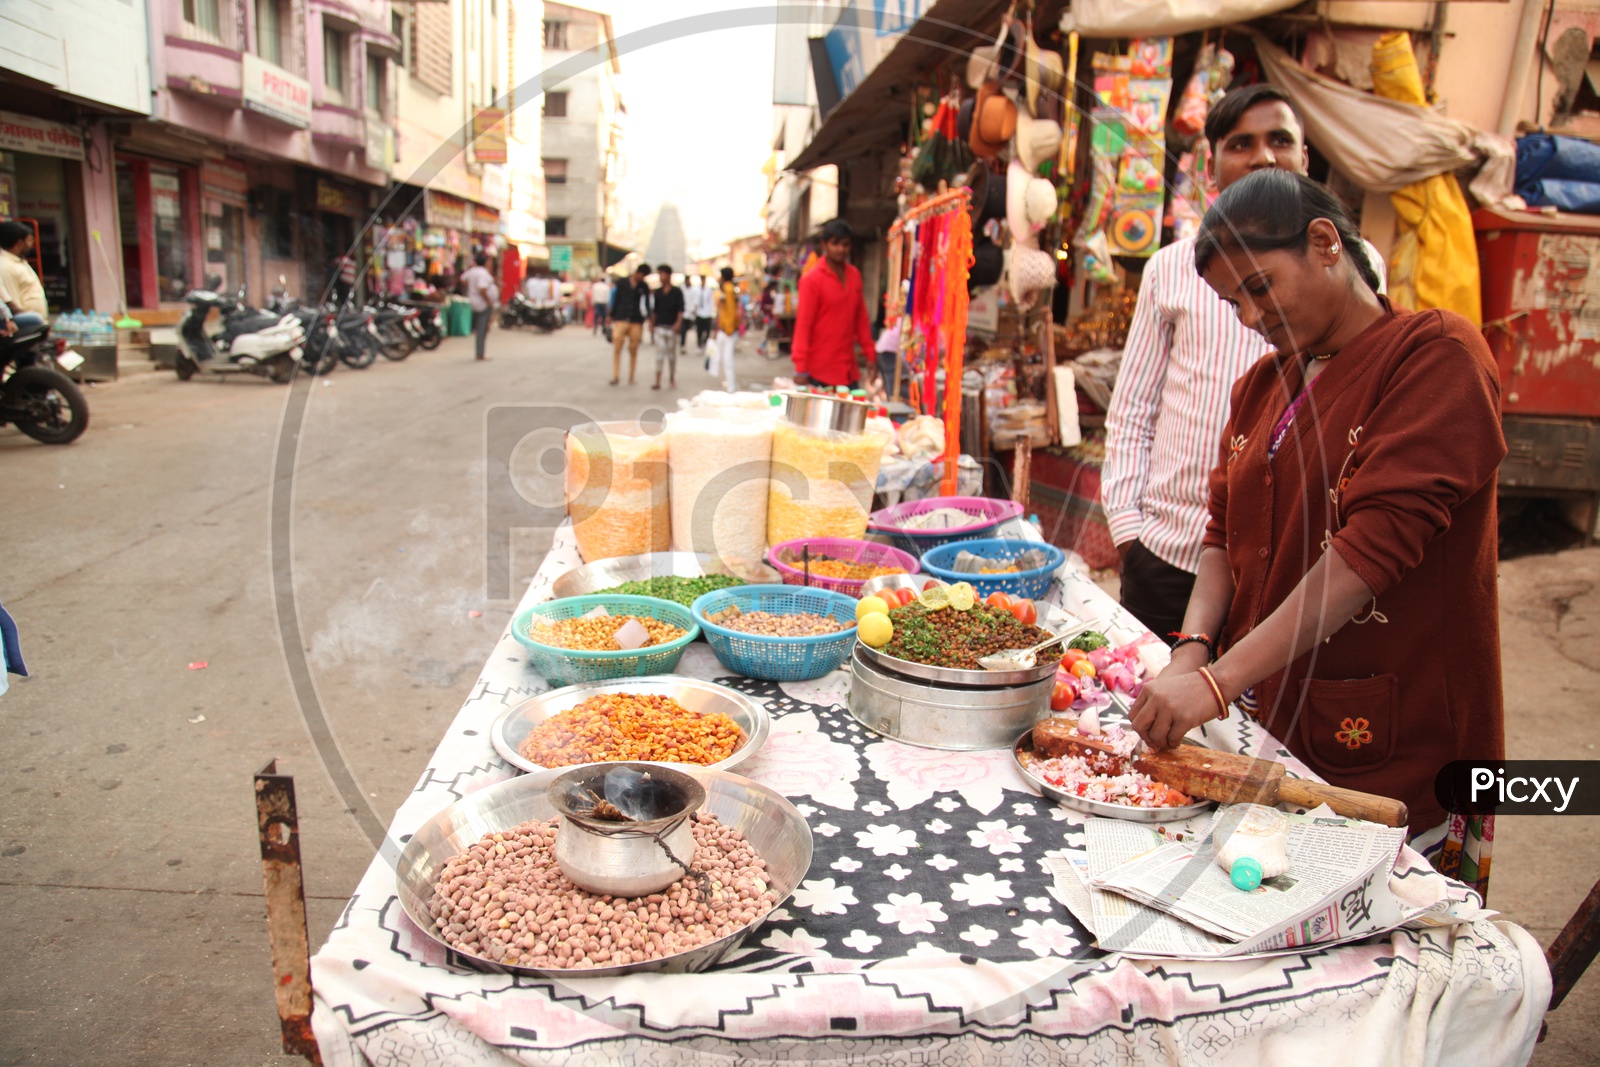 A woman selling chat in a street